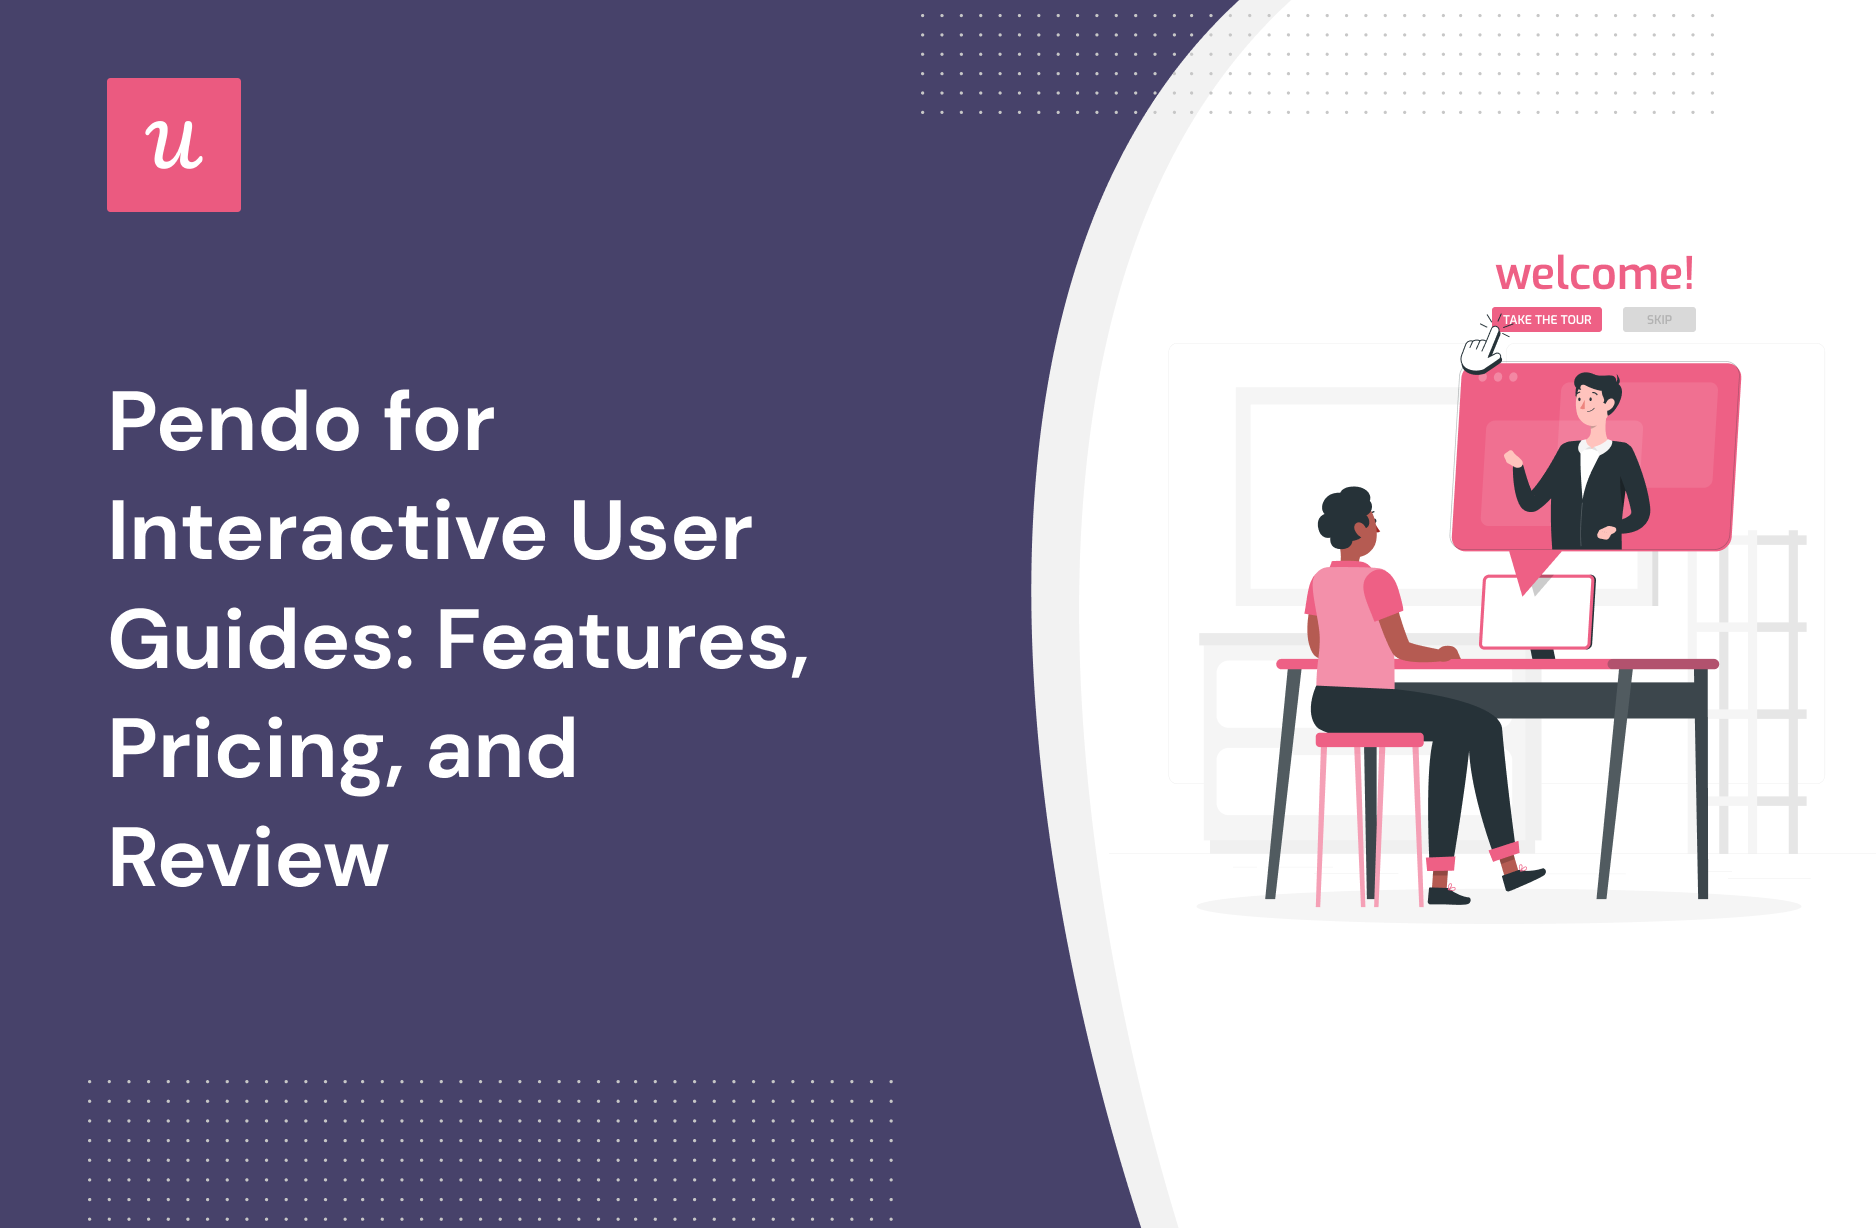 Pendo for interactive user guides: Features, Pricing, and Review